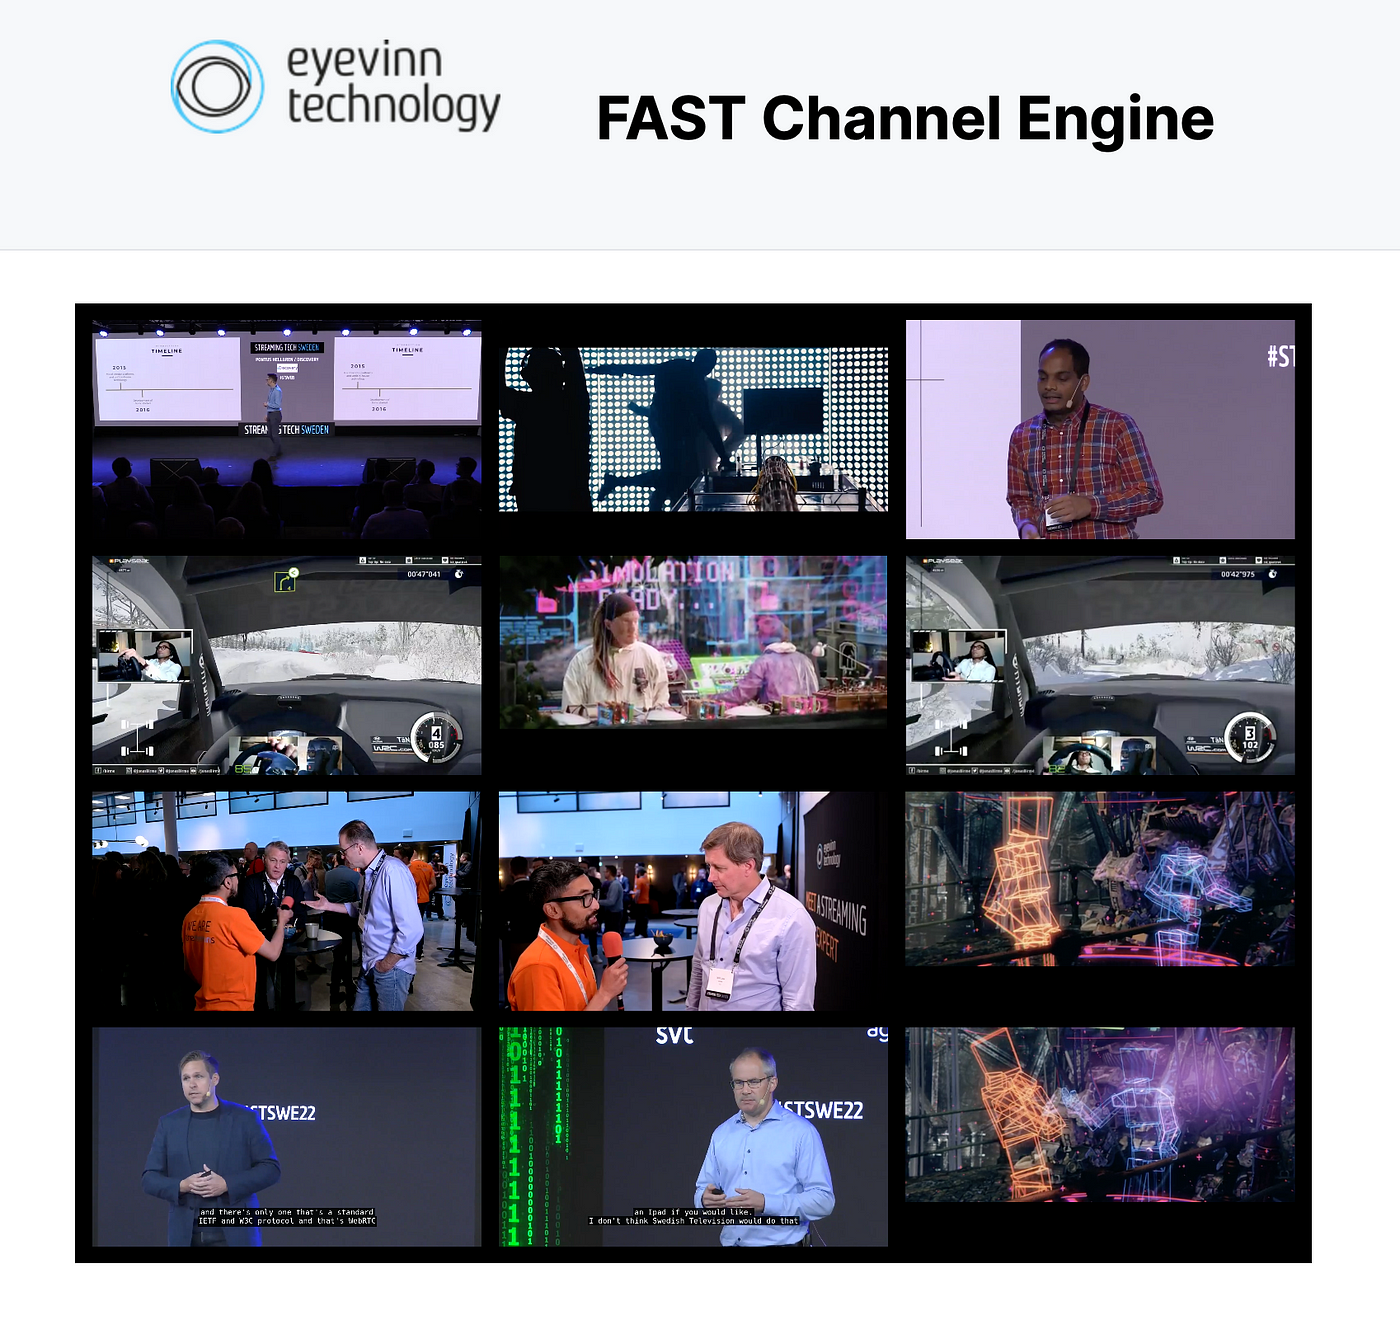 Create your own FAST Channels based on VOD2Live Technology and Open Source Components by Eyevinn Technology Medium